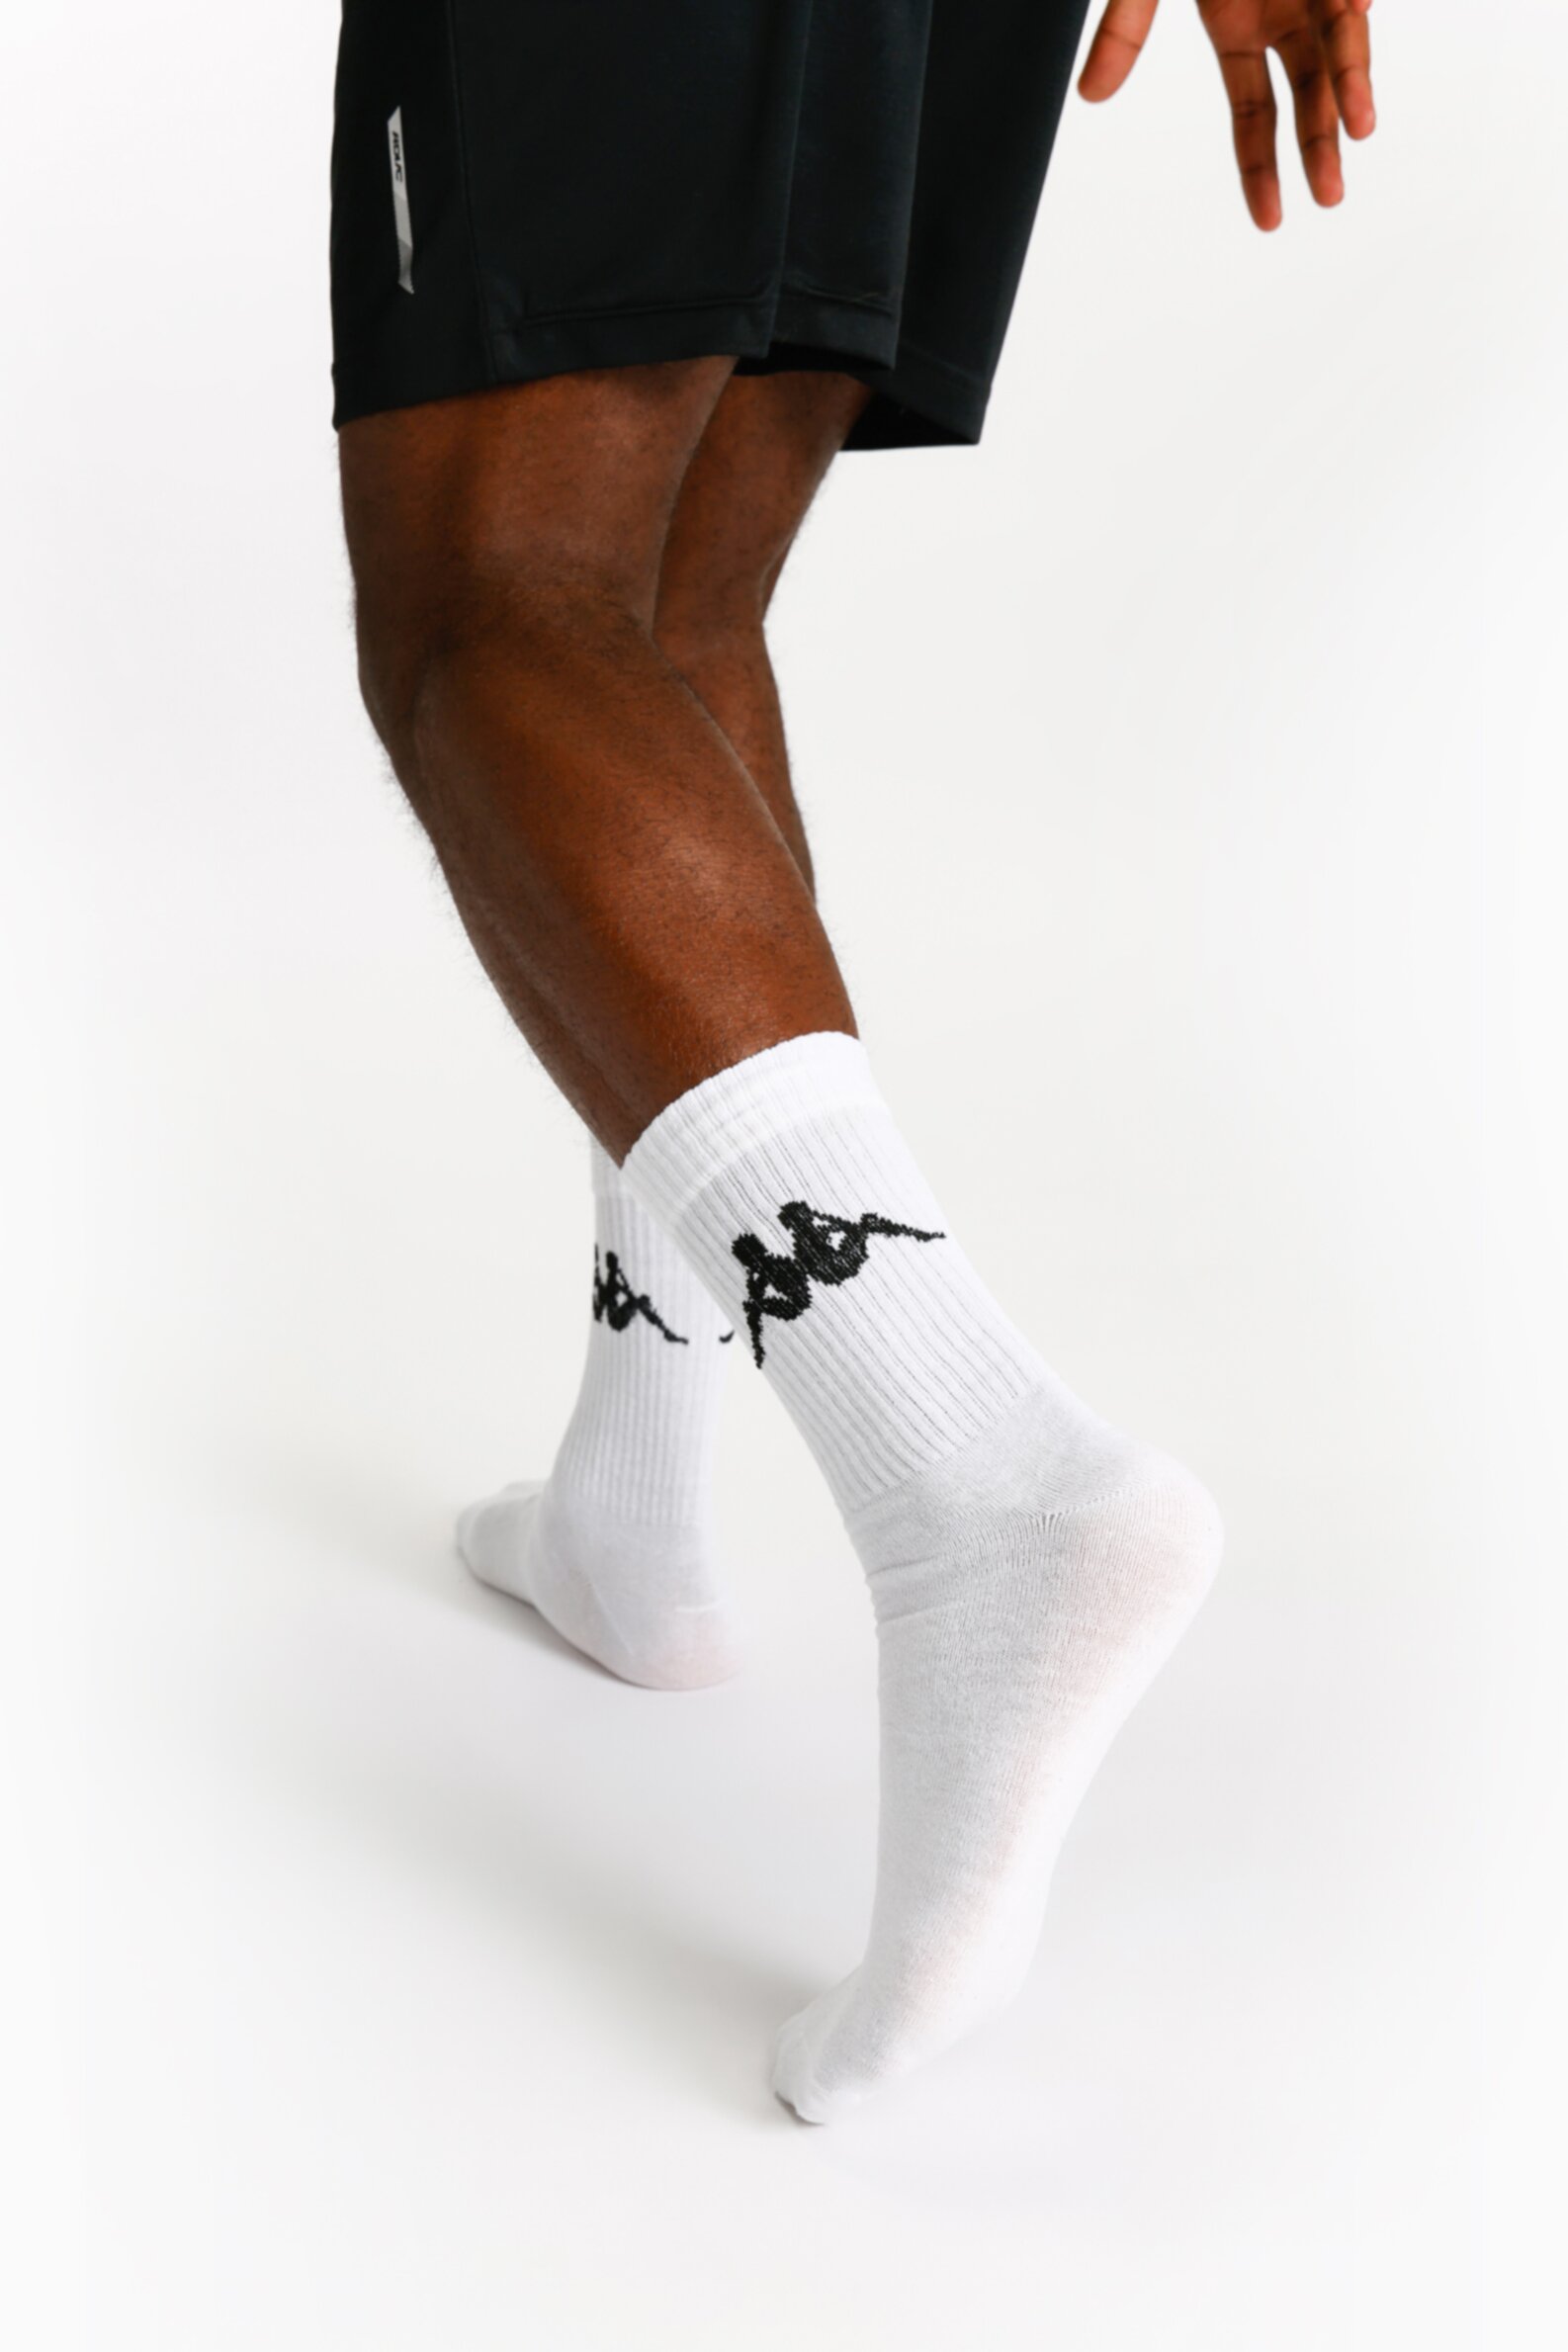 Pack 3 calcetines Kappa x Lefties - Ropa Deportiva - ROPA - Hombre 